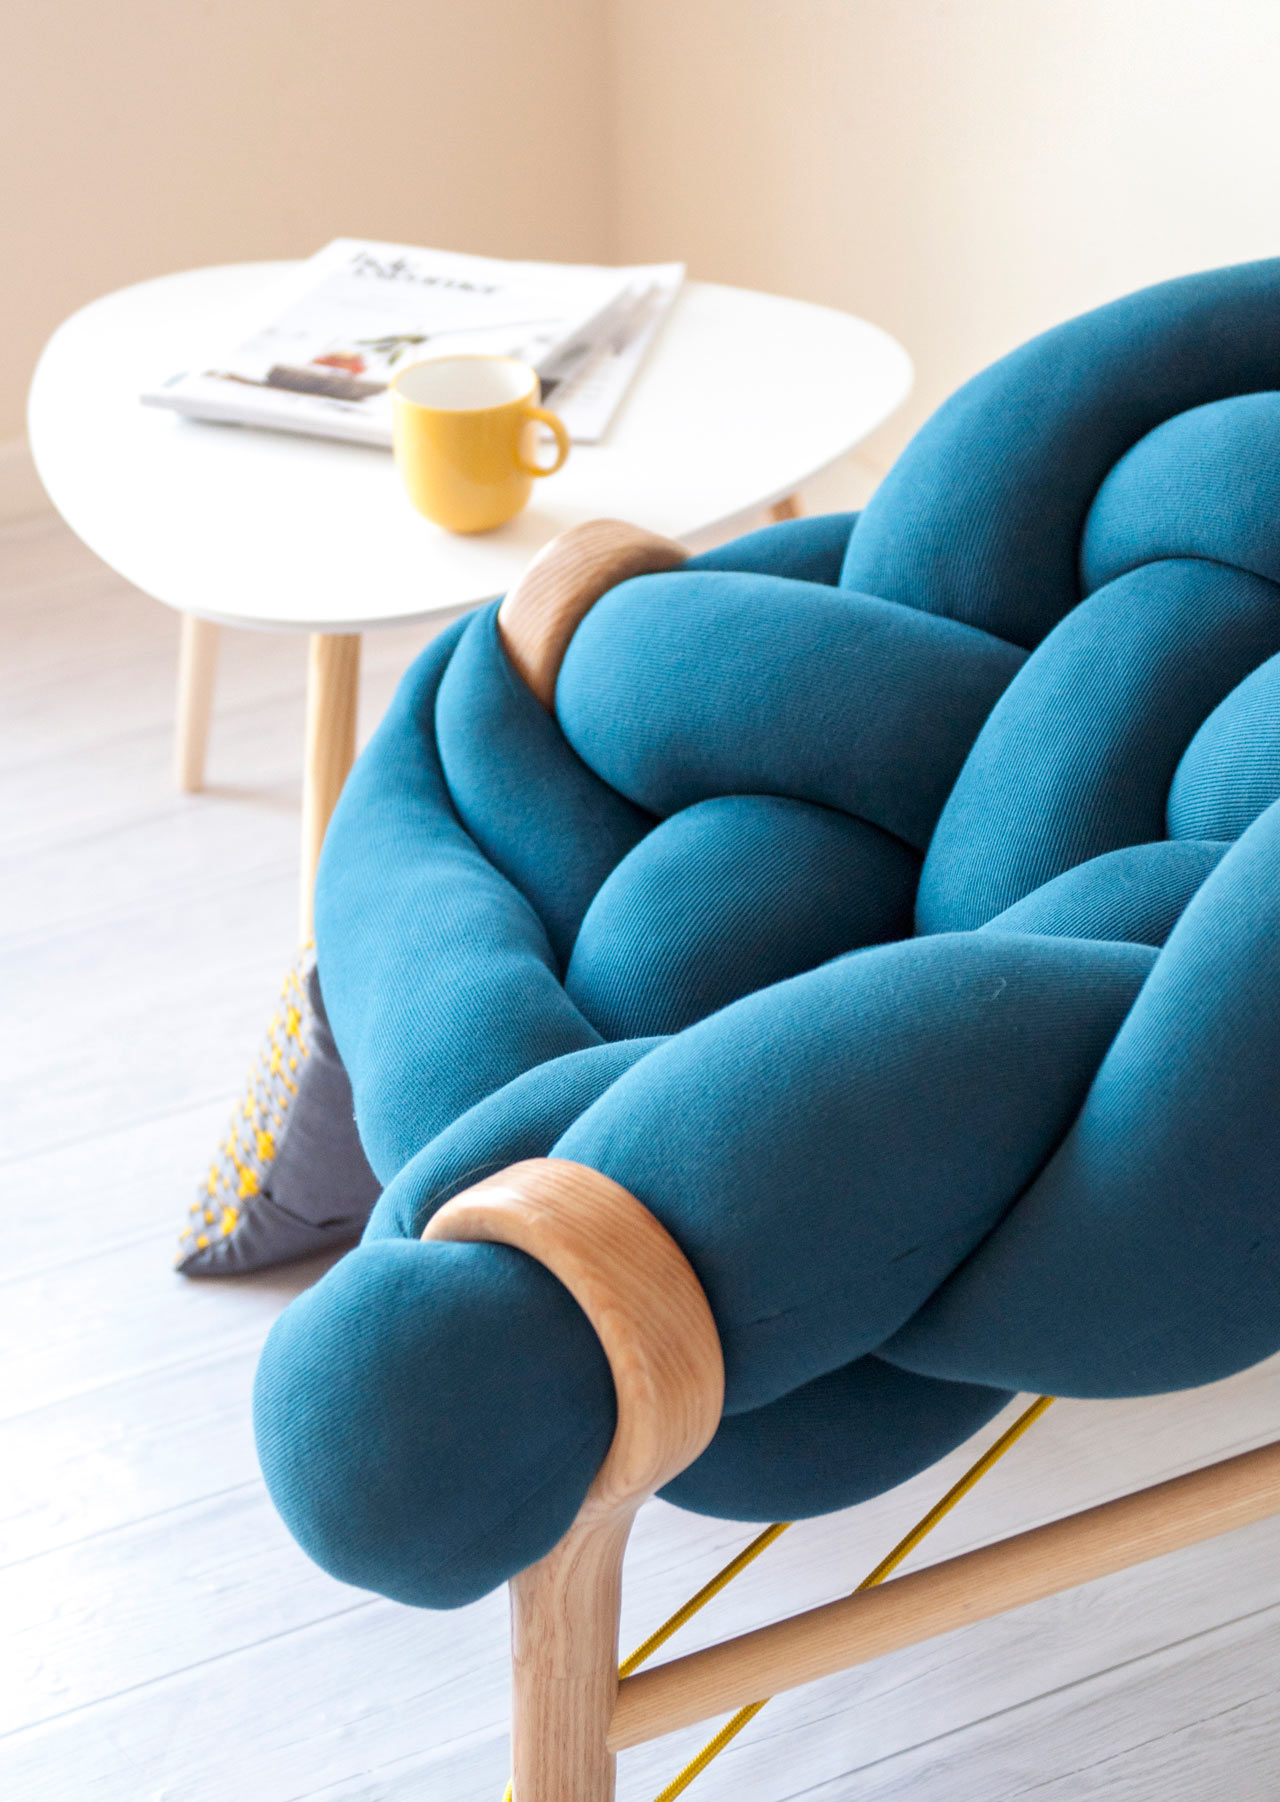 A Playful Collection of Furniture and Accessories